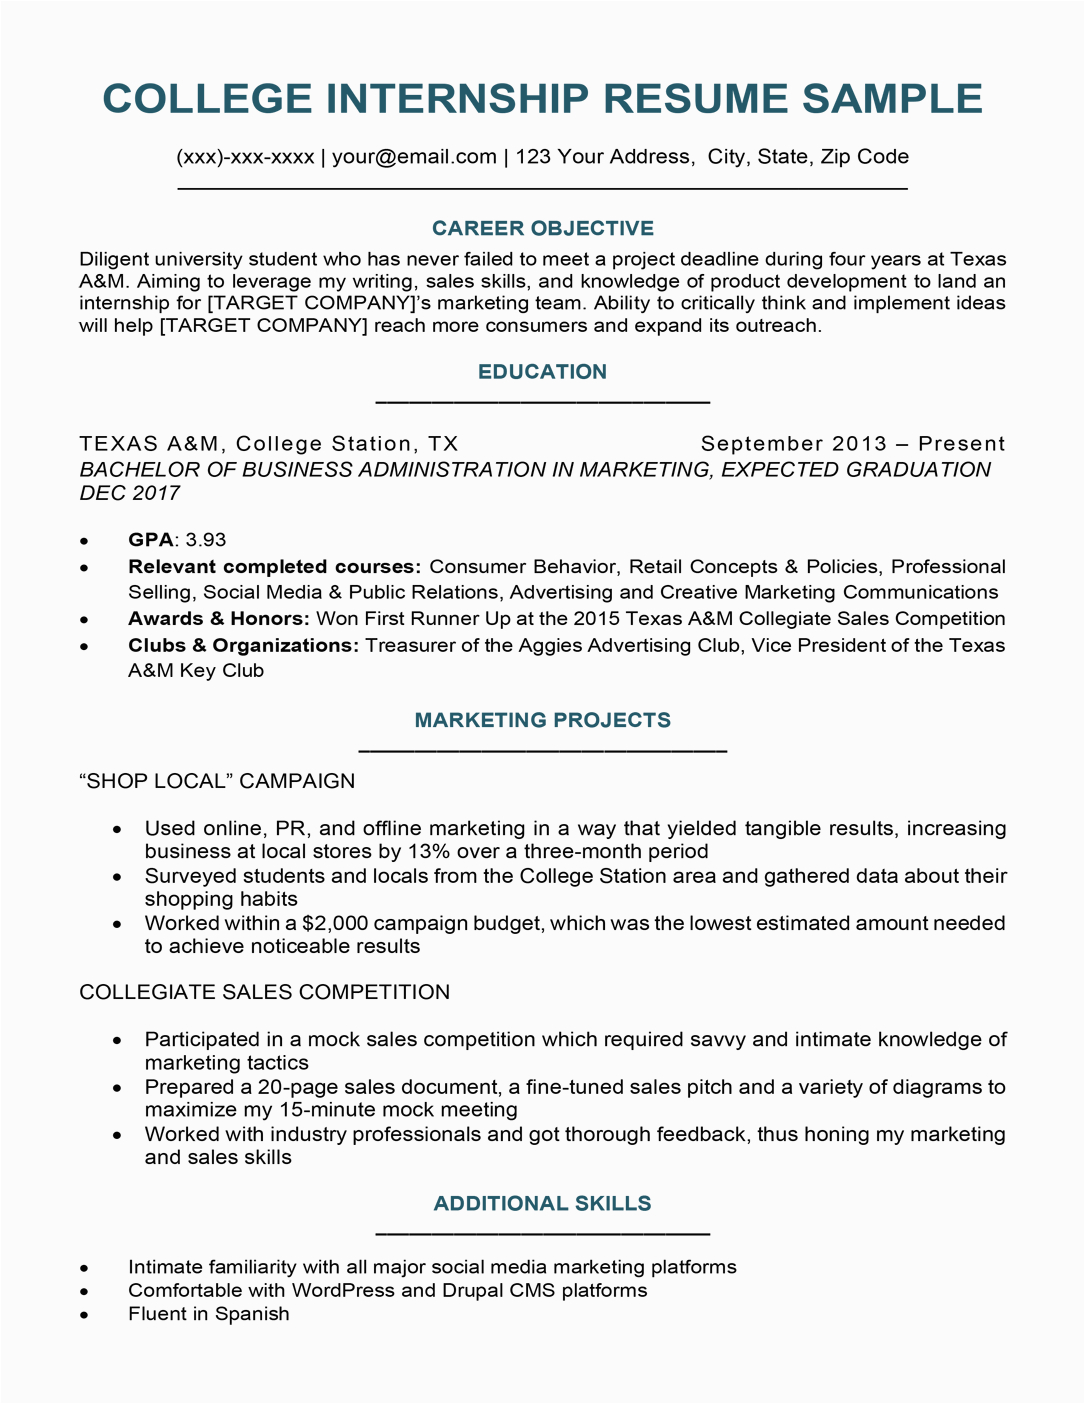 Sample Job Resume for College Student College Student Resume Sample & Writing Tips